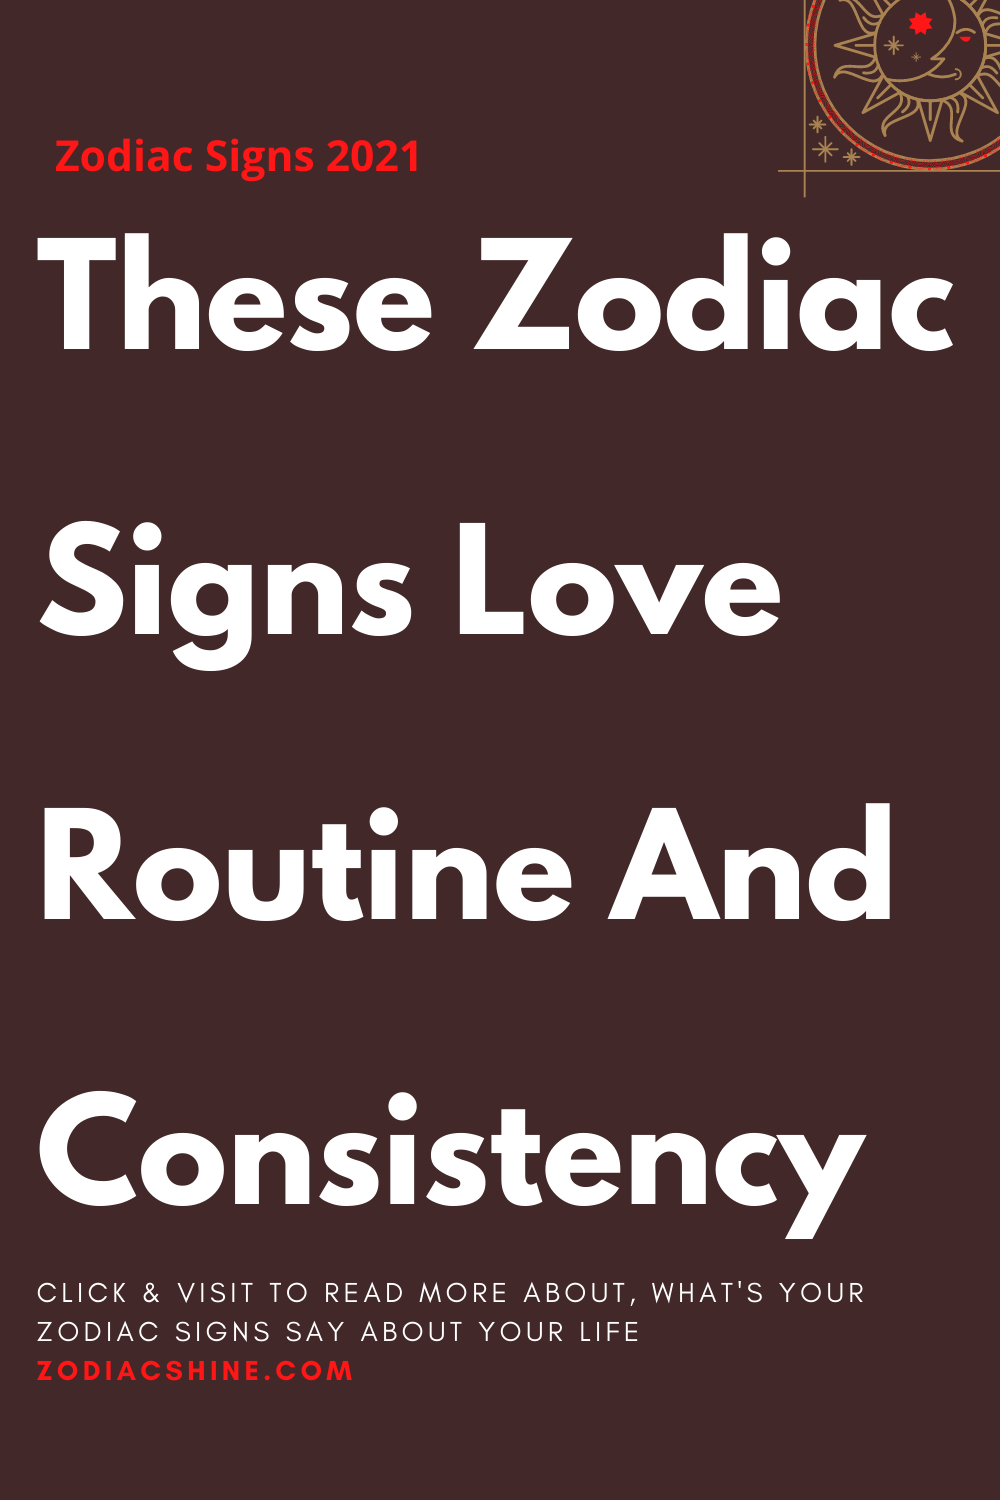 These Zodiac Signs Love Routine And Consistency